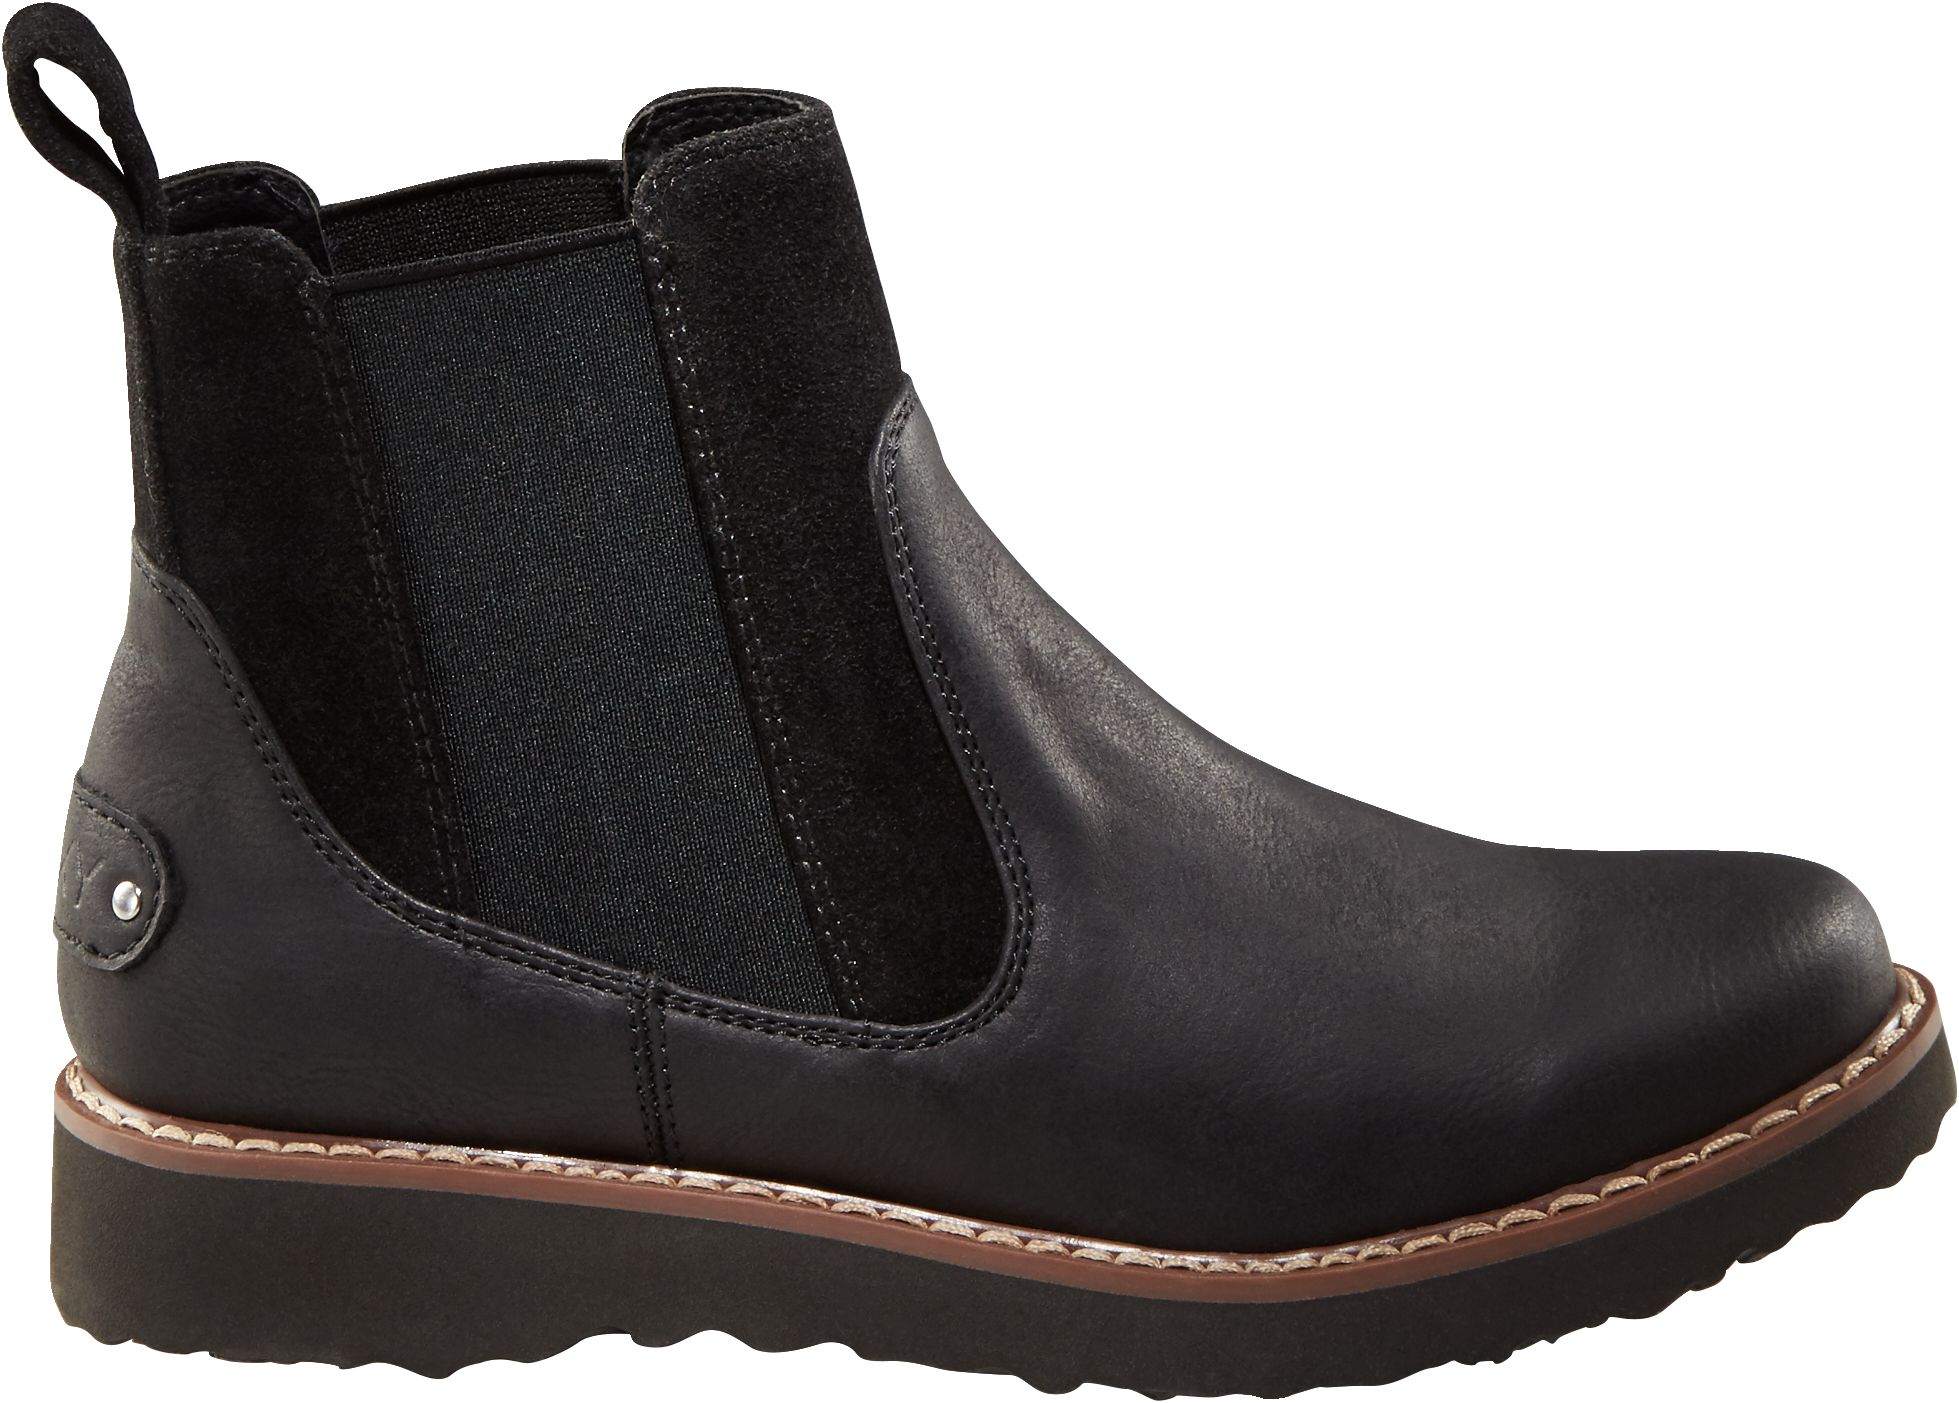 Image of Roxy Women's Maddie J Chelsea Boots Ankle Slip On Casual Faux Leather